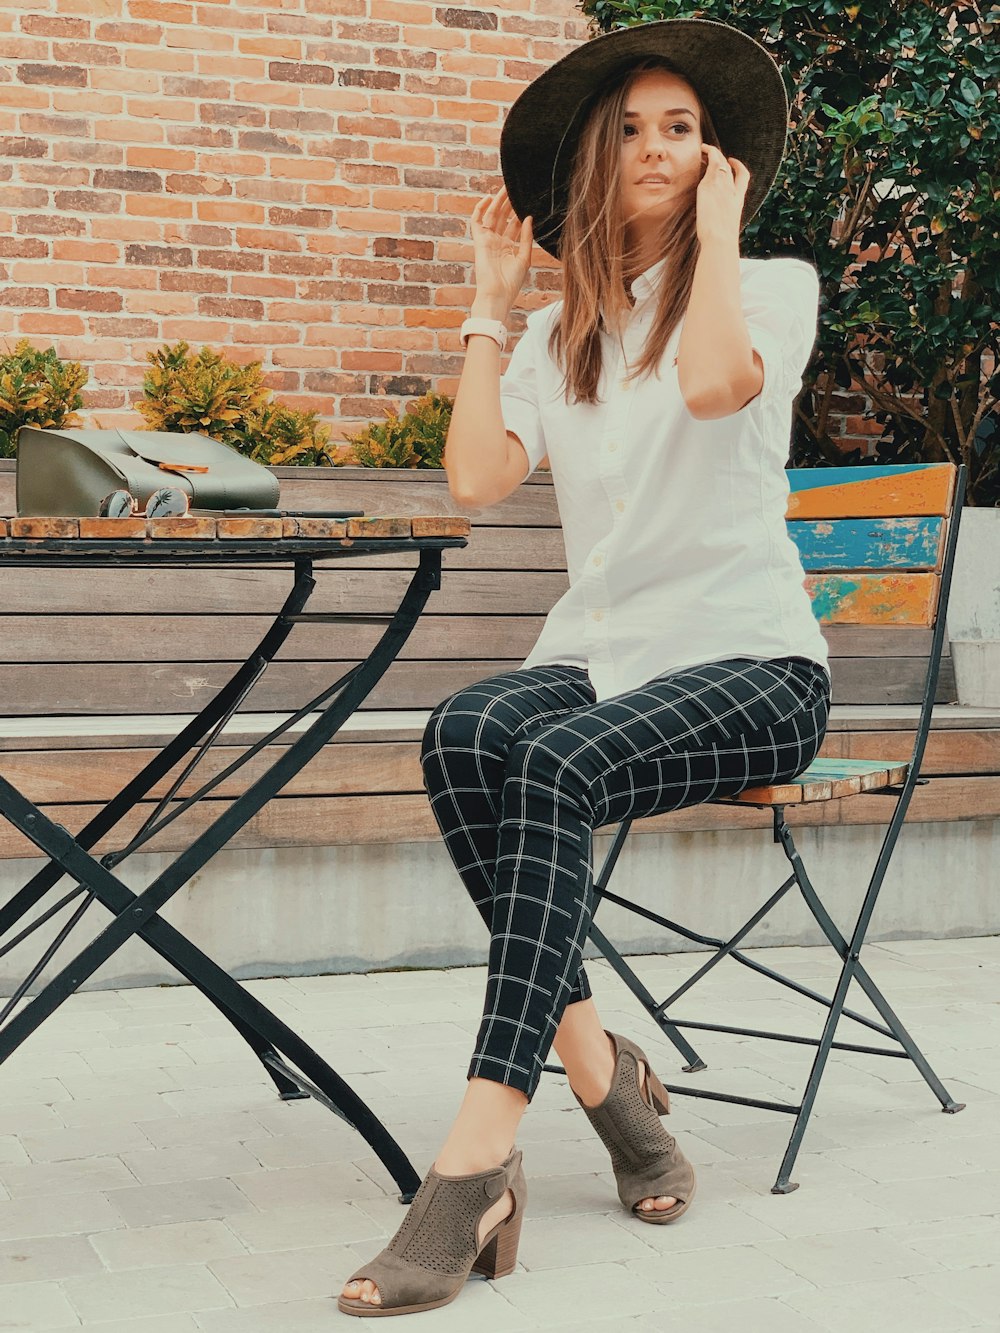 woman in white shirt and black and white plaid pants sitting on black metal chair